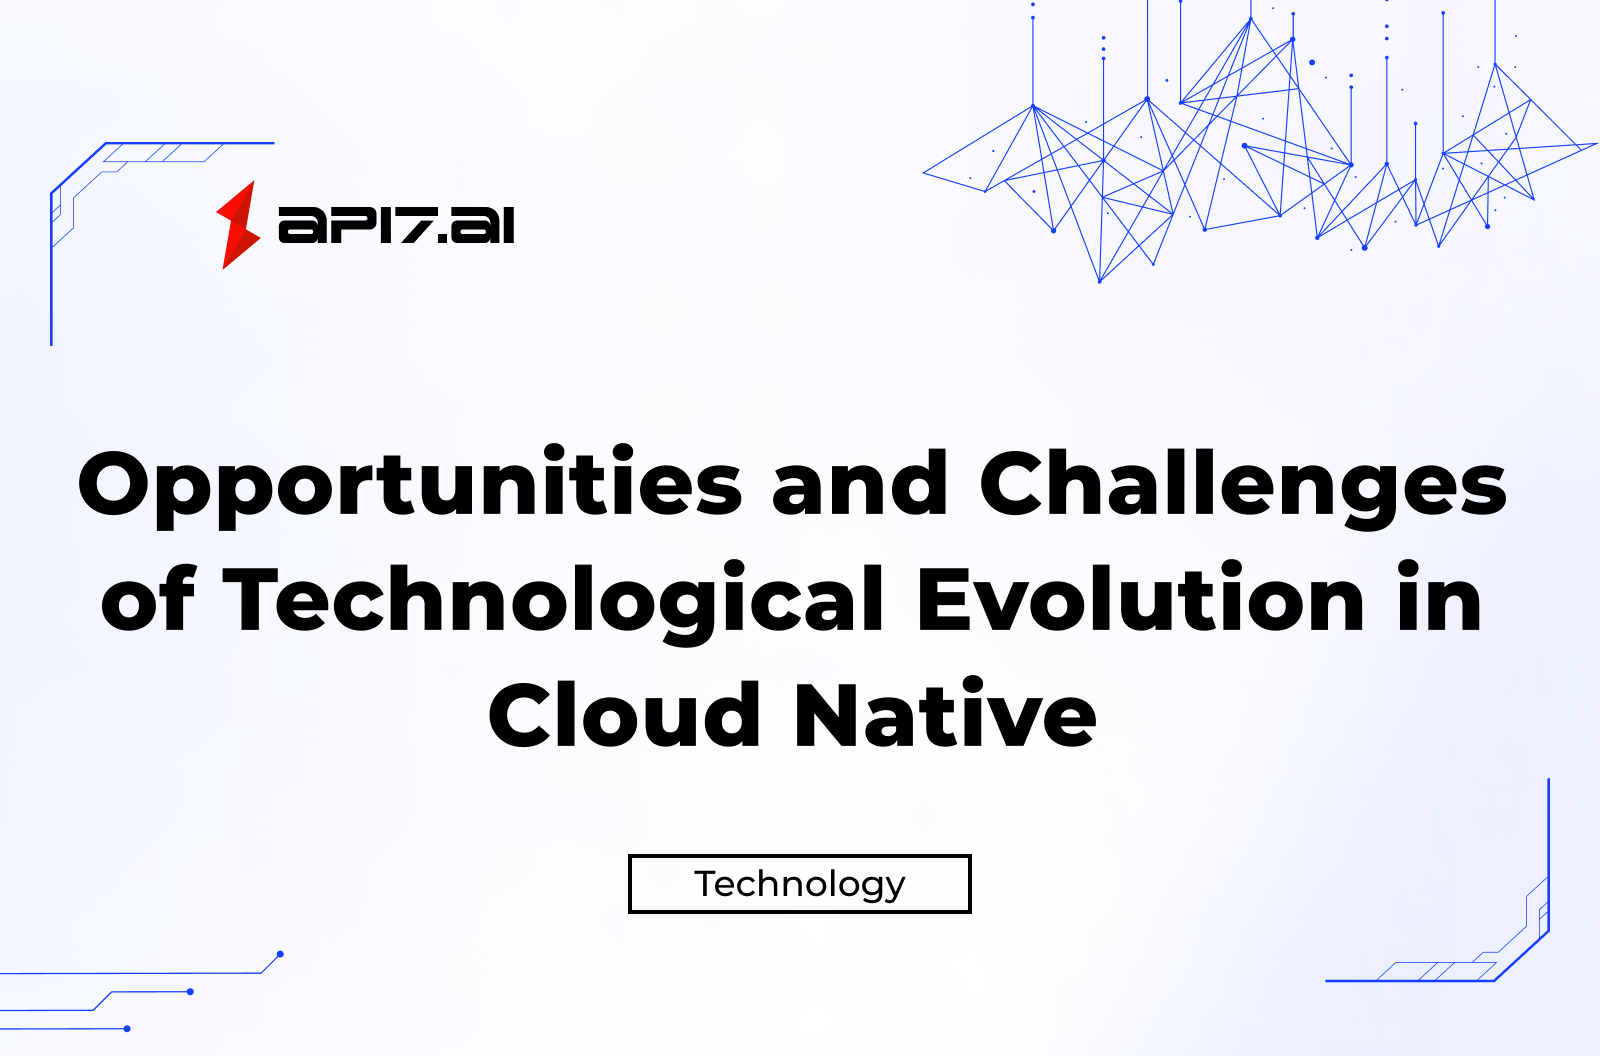 Opportunities and Challenges of Technological Evolution in Cloud Native